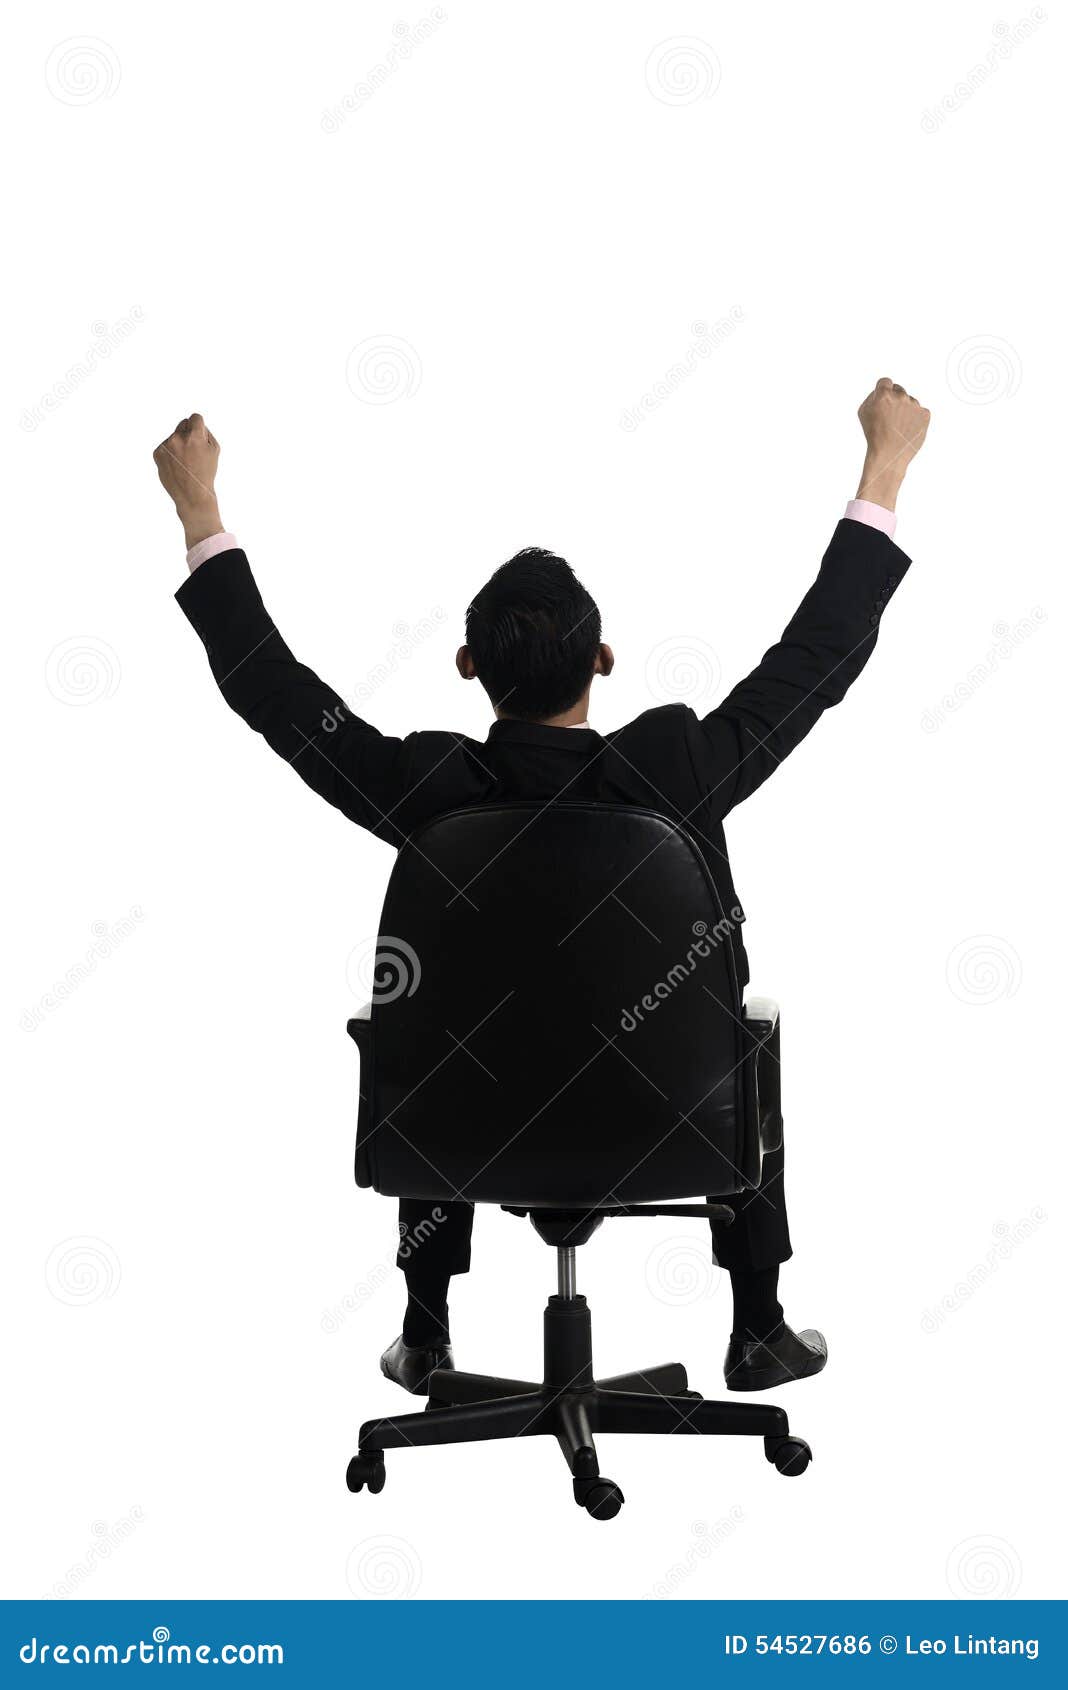 backview of man raise hand sitting on the chair